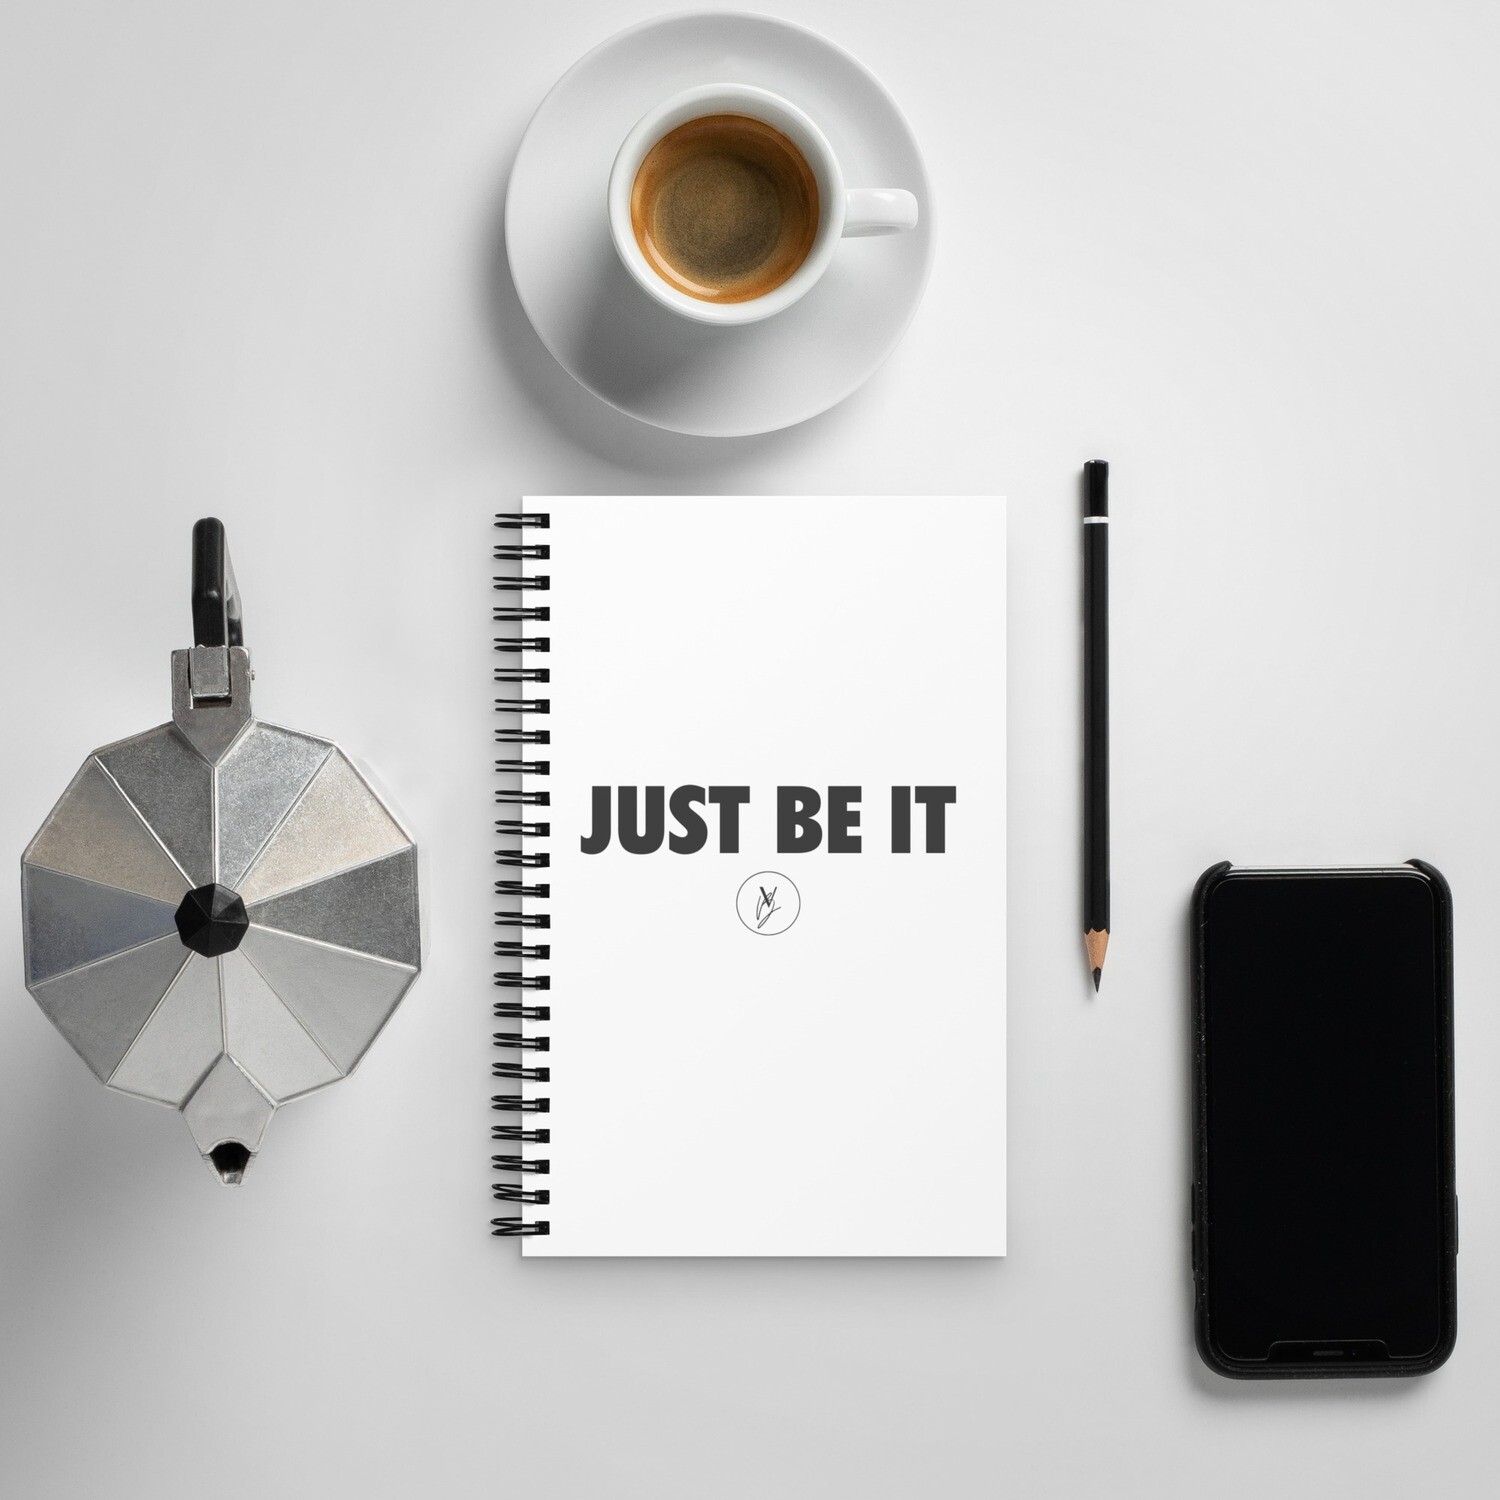 Just Be It - Spiral notebook